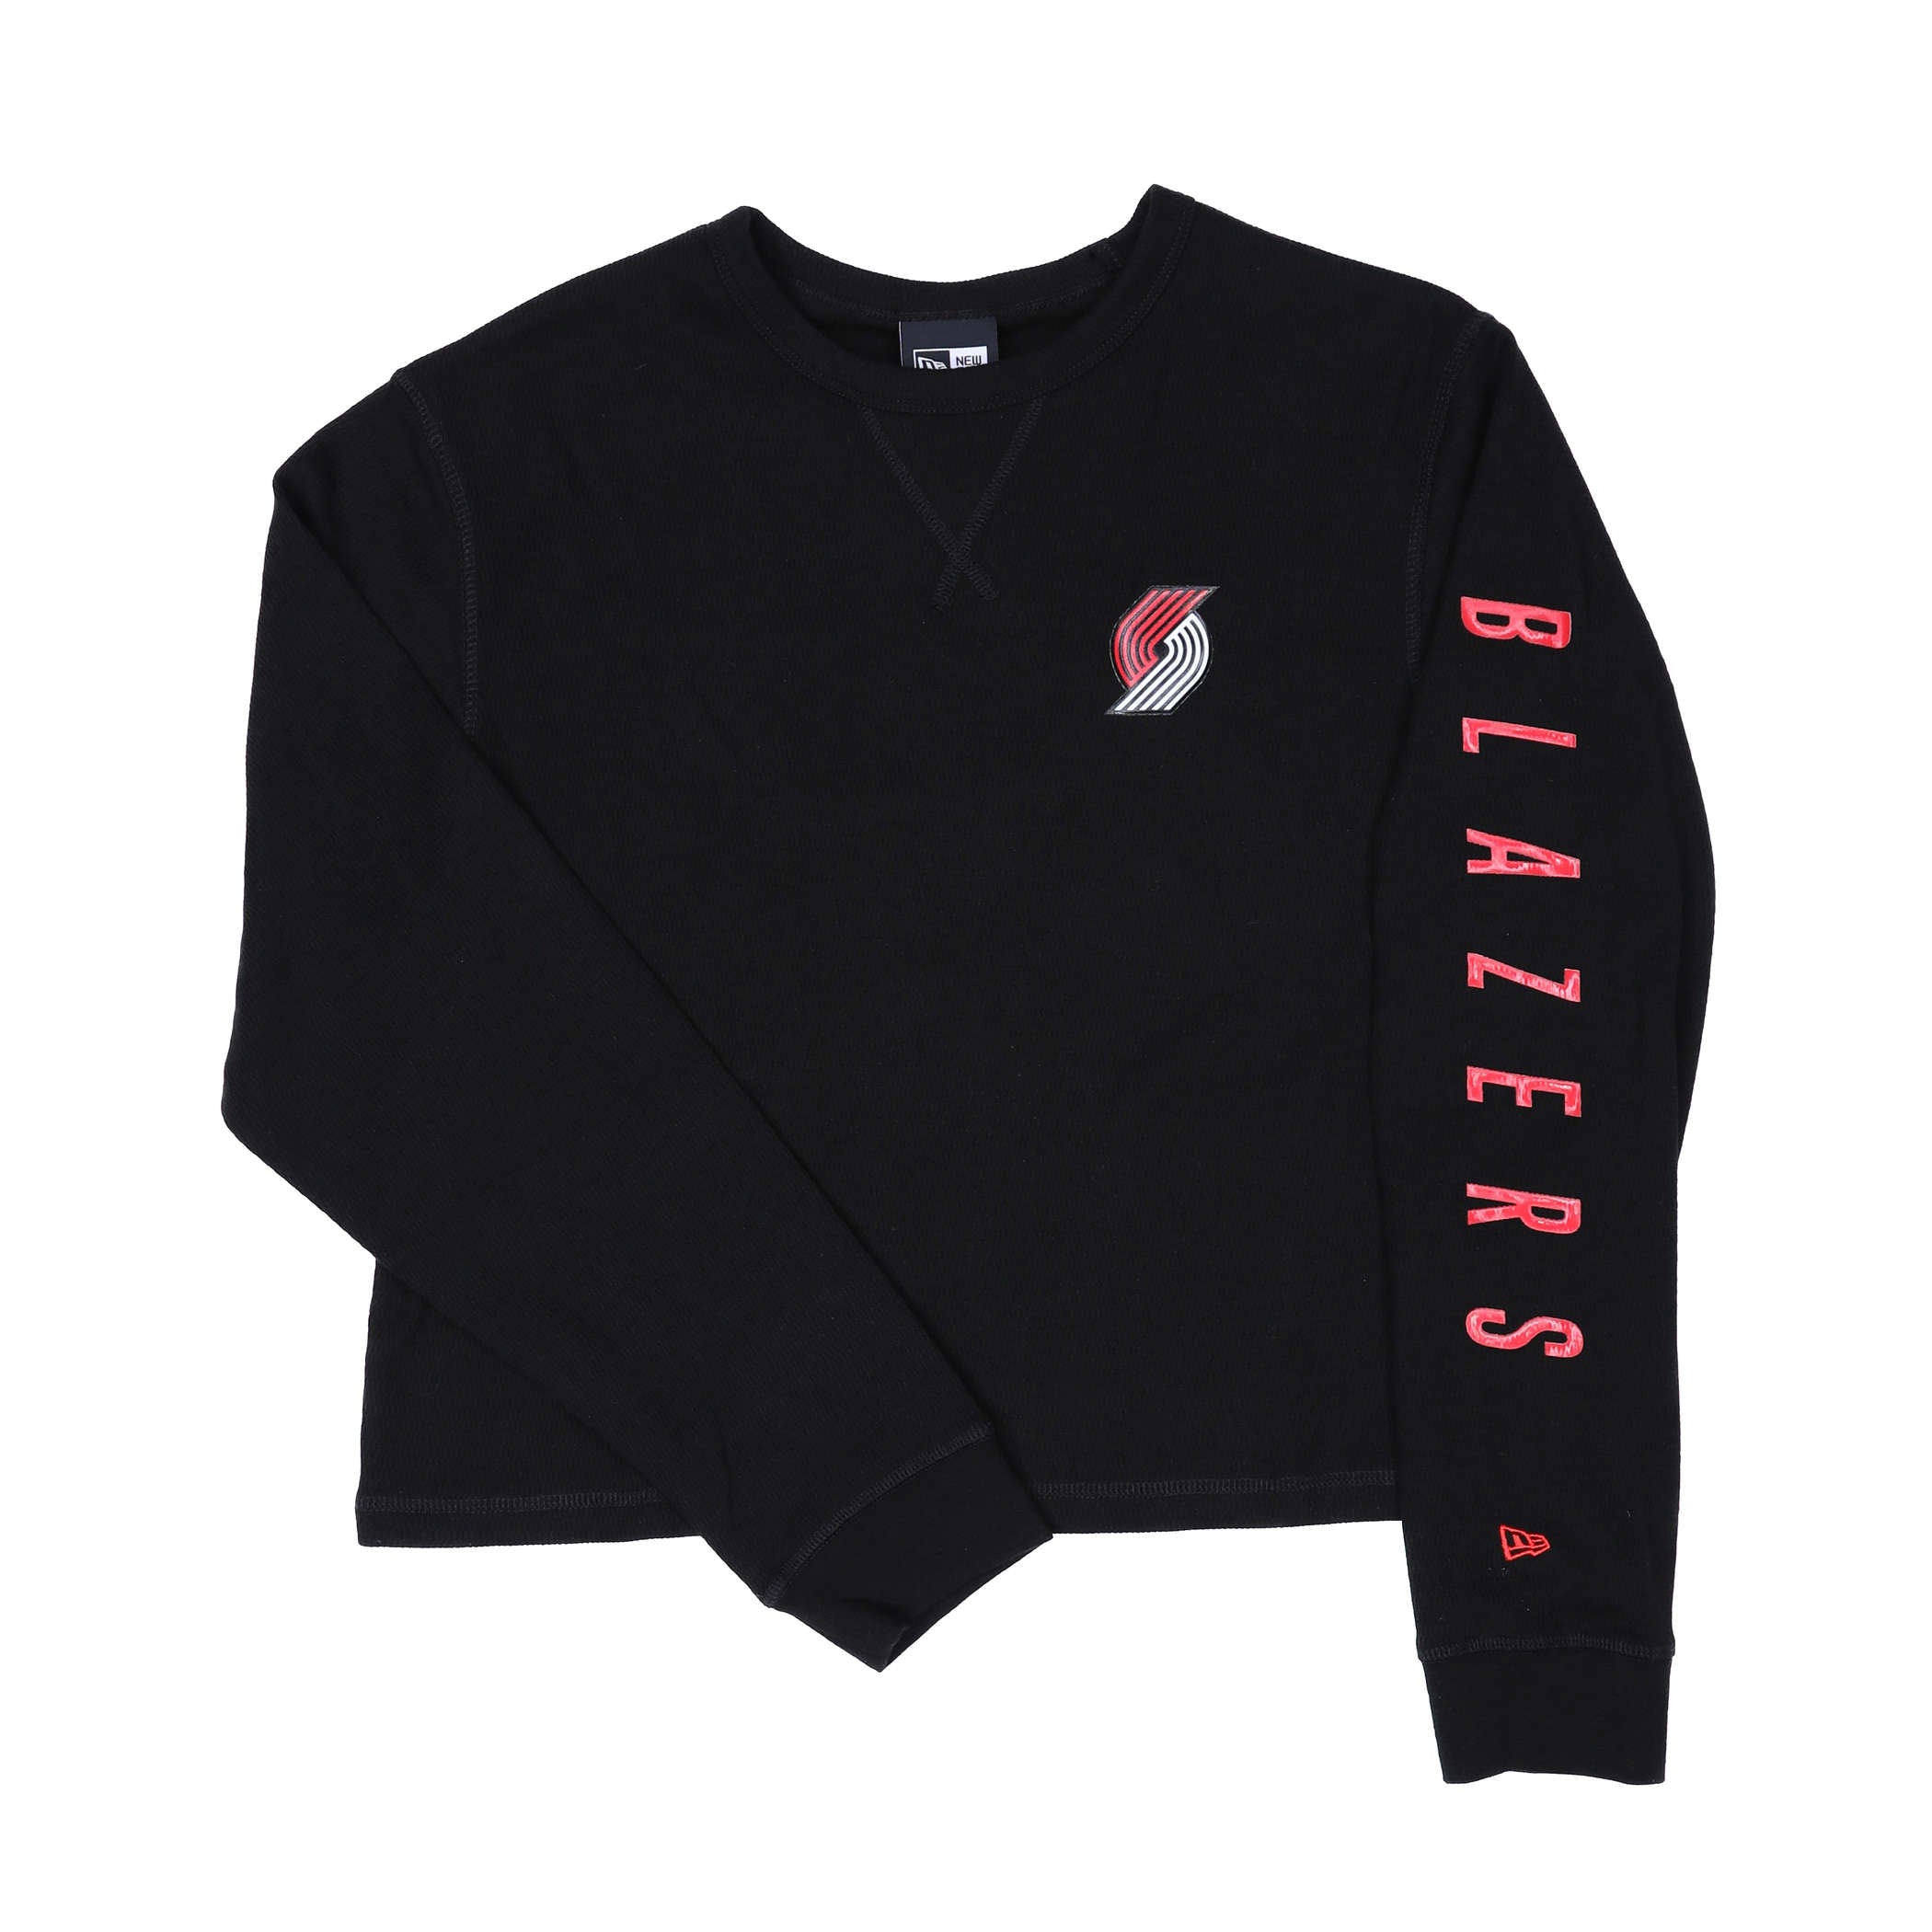 Shop the Latest Women's Trail Blazers Collection | Rip City Clothing